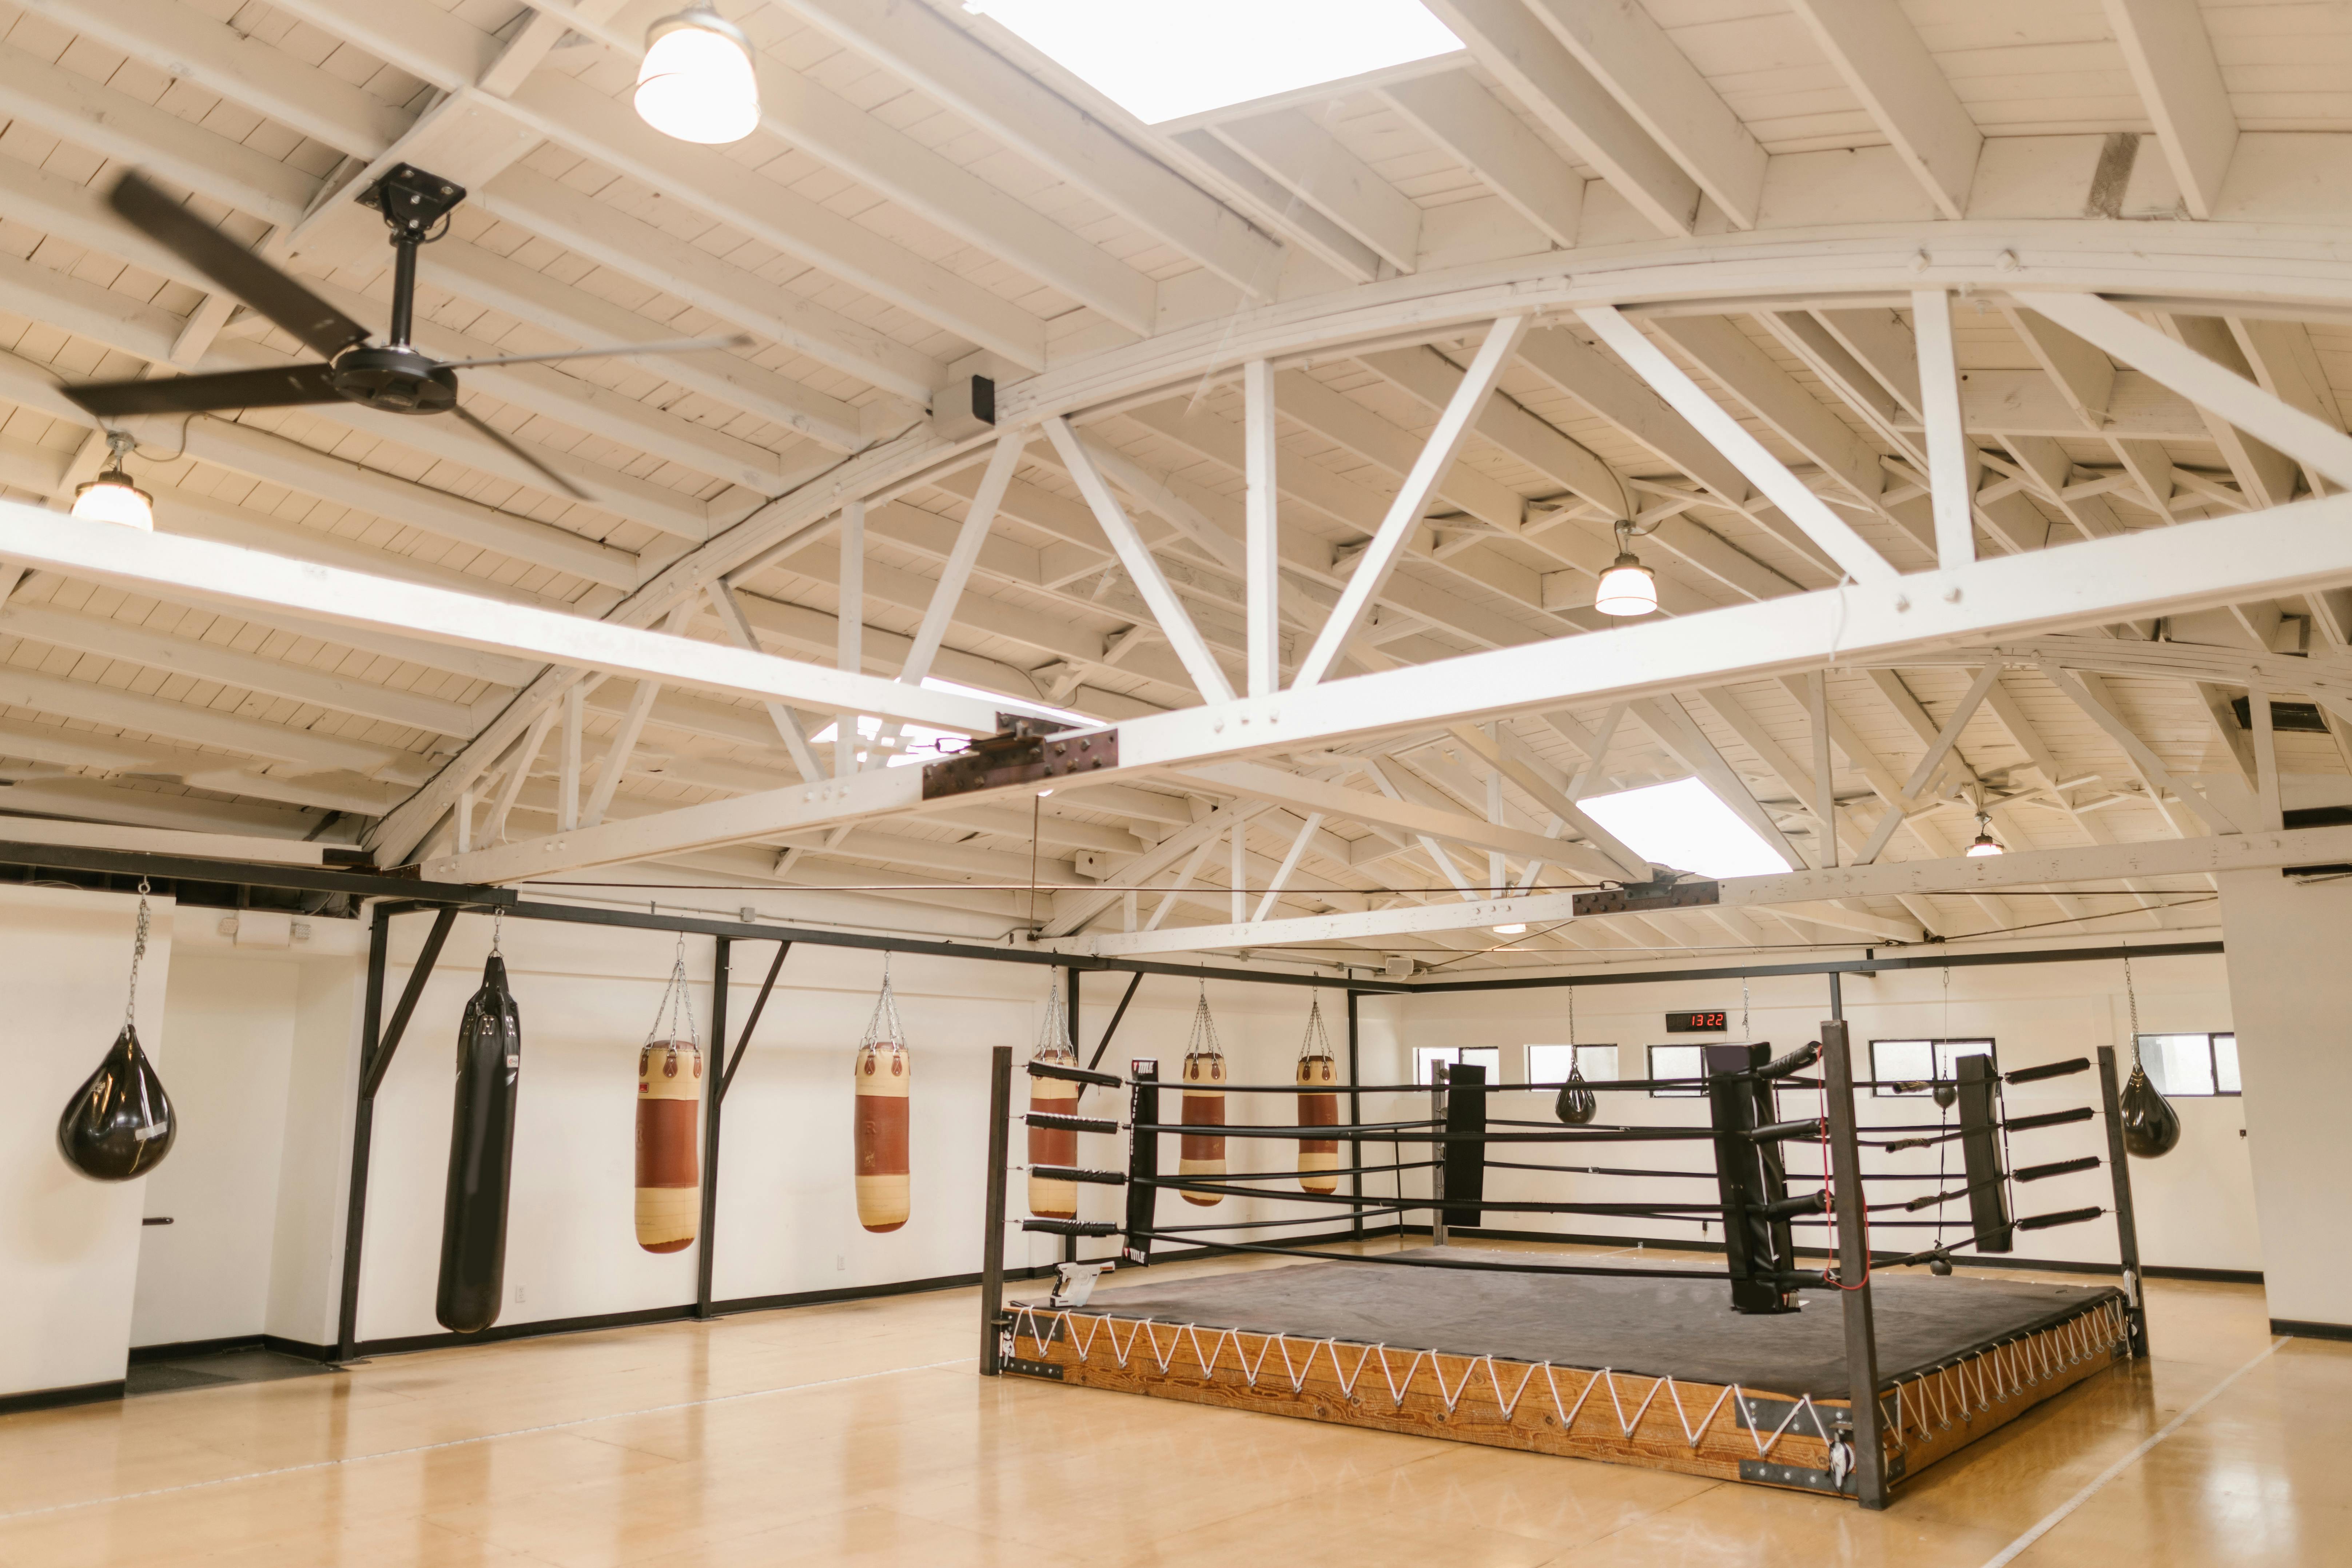 Fighters at new boxing gym in Stratford, P.E.I. ready to compete | SaltWire